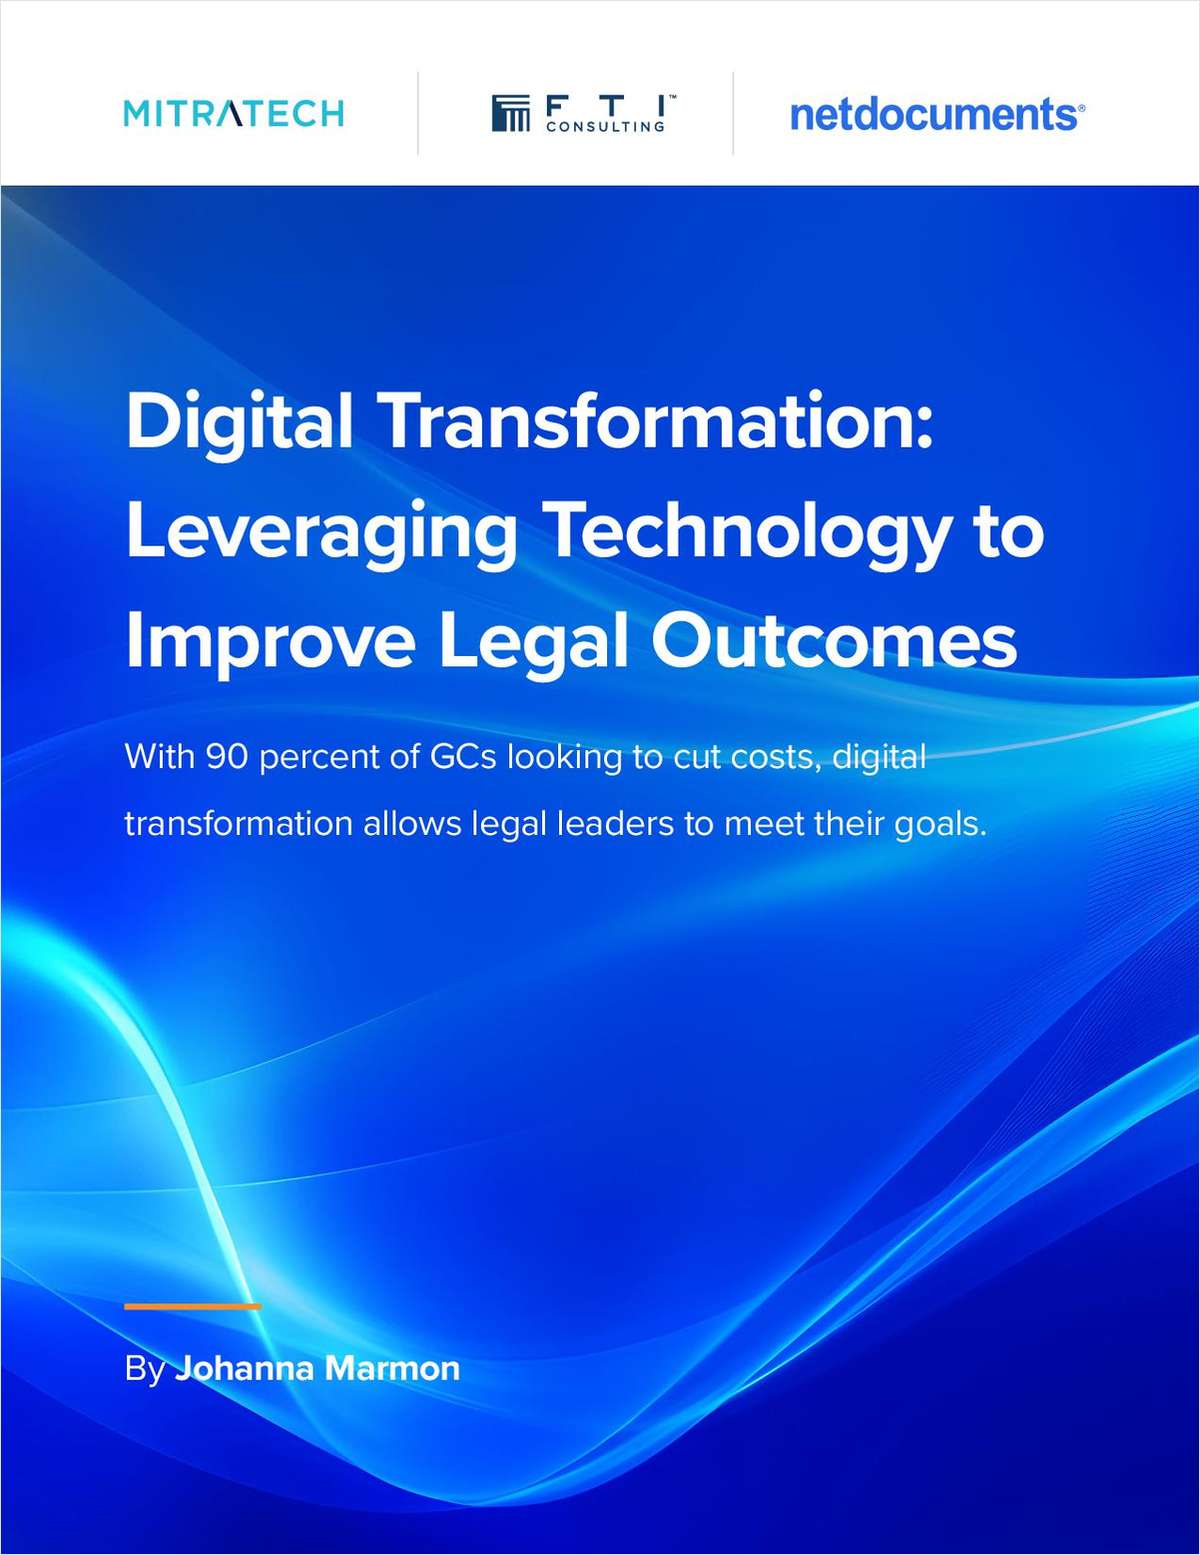 It comes as no surprise to in-house leaders that 80% of digital transformation projects face challenges. This eBook will help you pave the way to transformative success by outlining best practices, how to apply strategic planning, and deploy effective change management to implement new technologies.